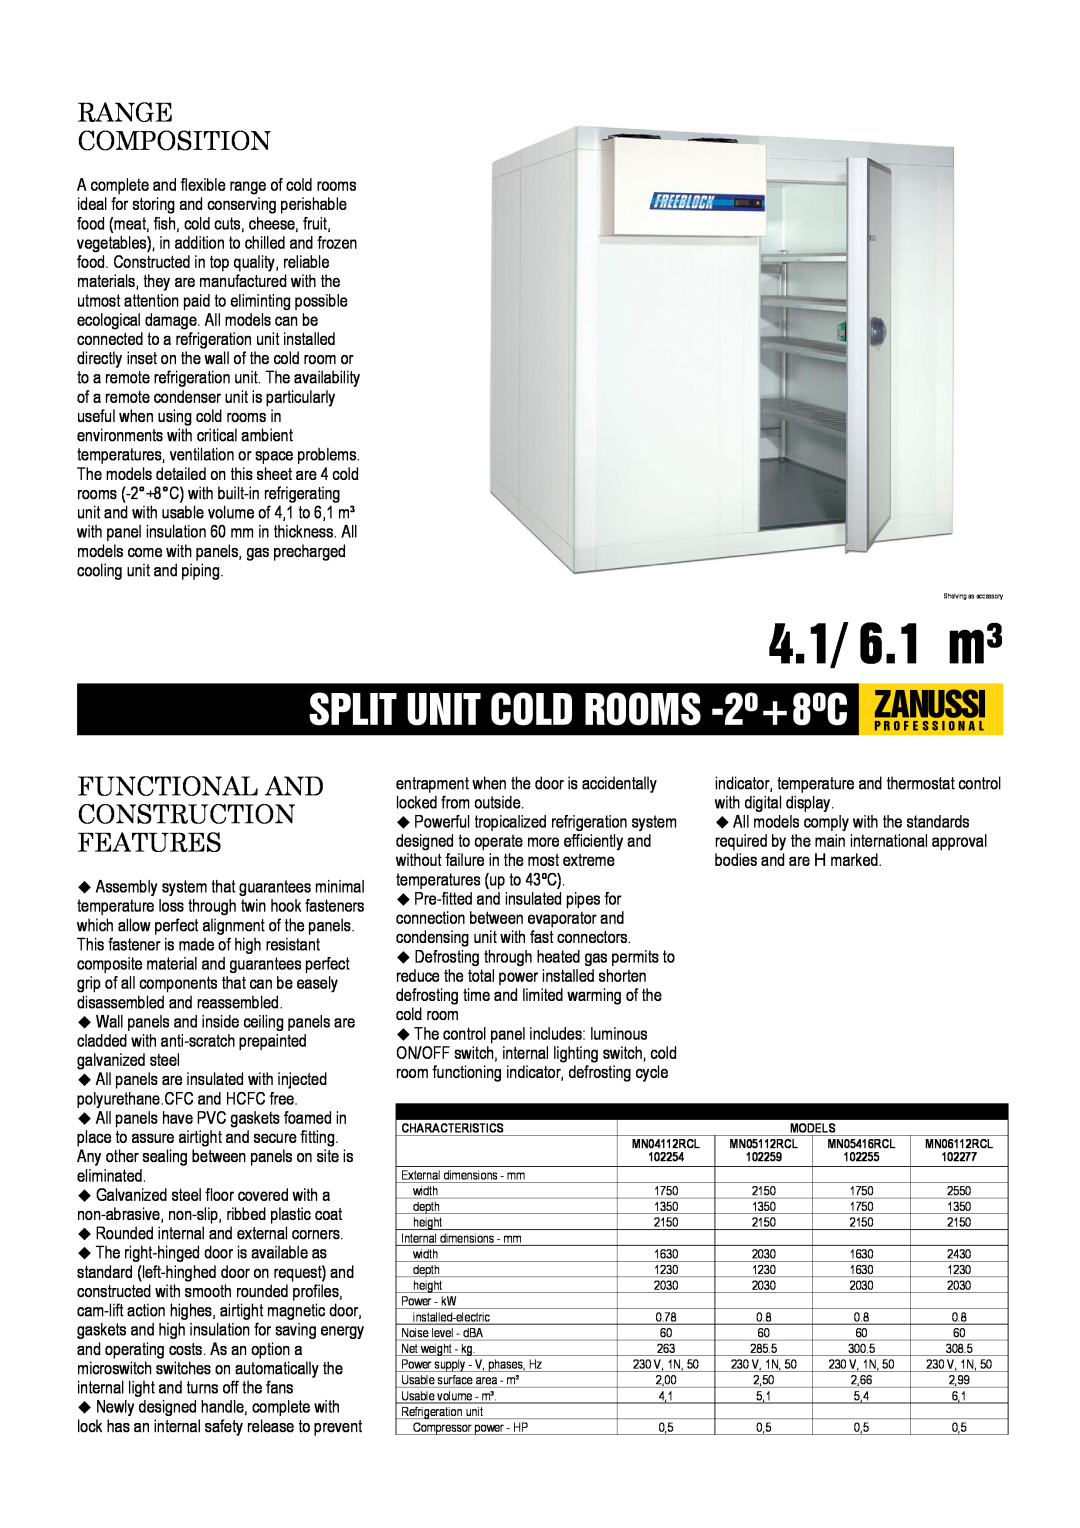 Zanussi MN04112RCL, MN05416RCL, MN06112RCL dimensions 4.1/ 6.1 m³, Range Composition, Functional And Construction Features 